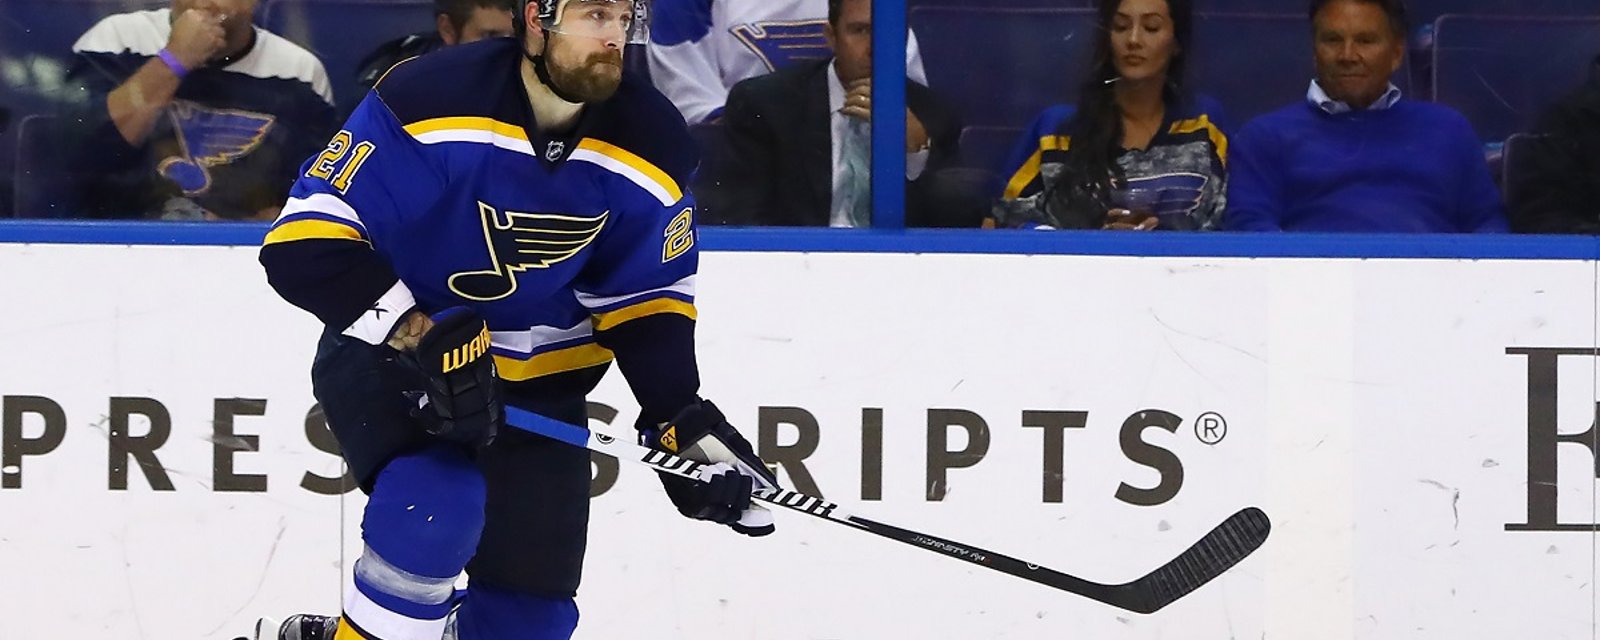 Patrick Berglund headed to the World Cup after player is rushed to hospital.